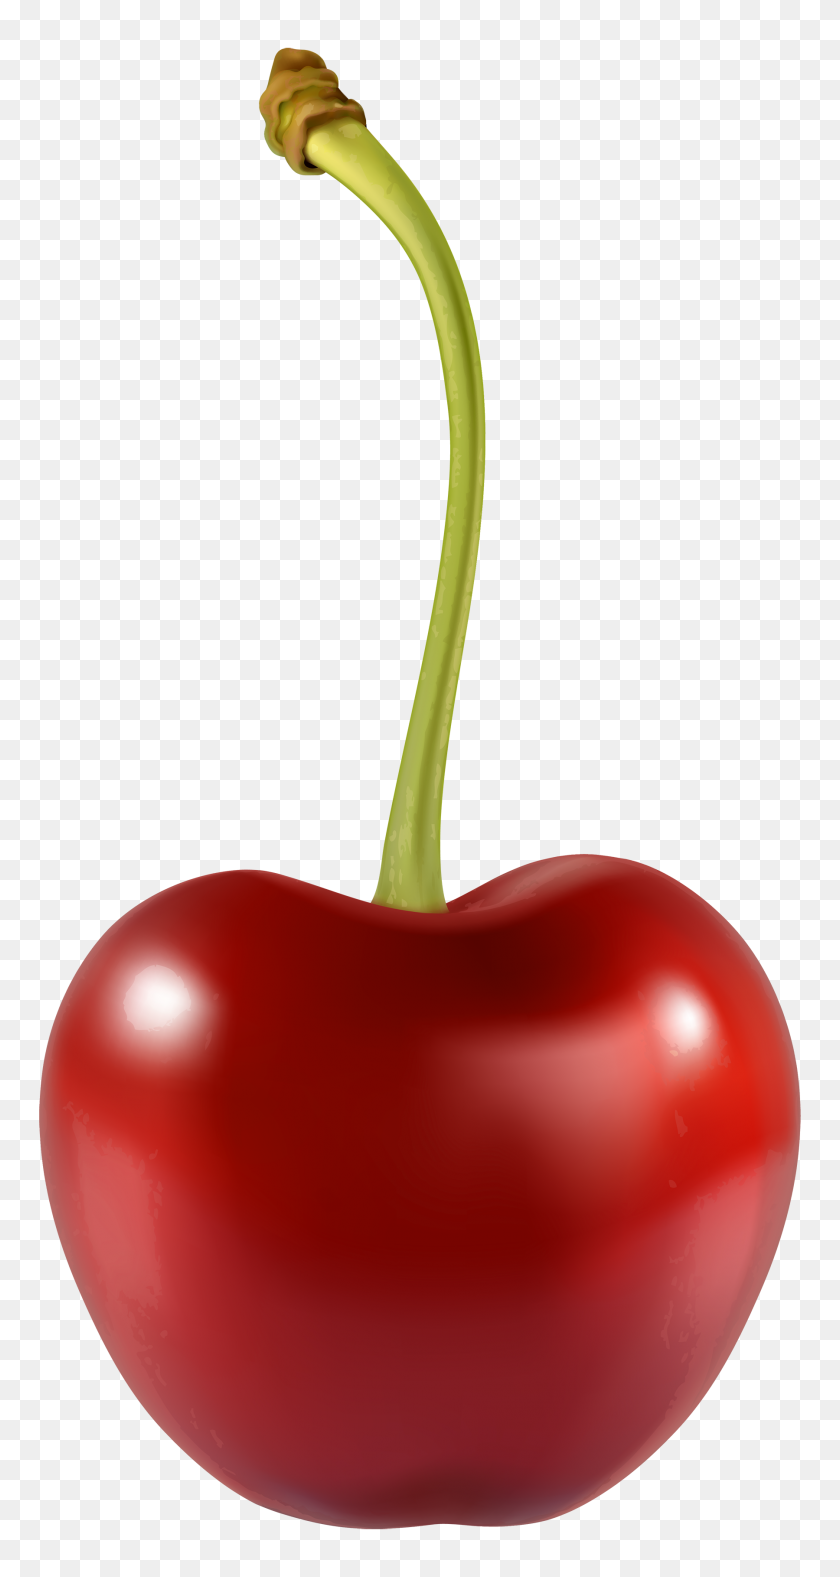 1799x3500 Cherry Png Clipart - Fruits And Vegetables PNG